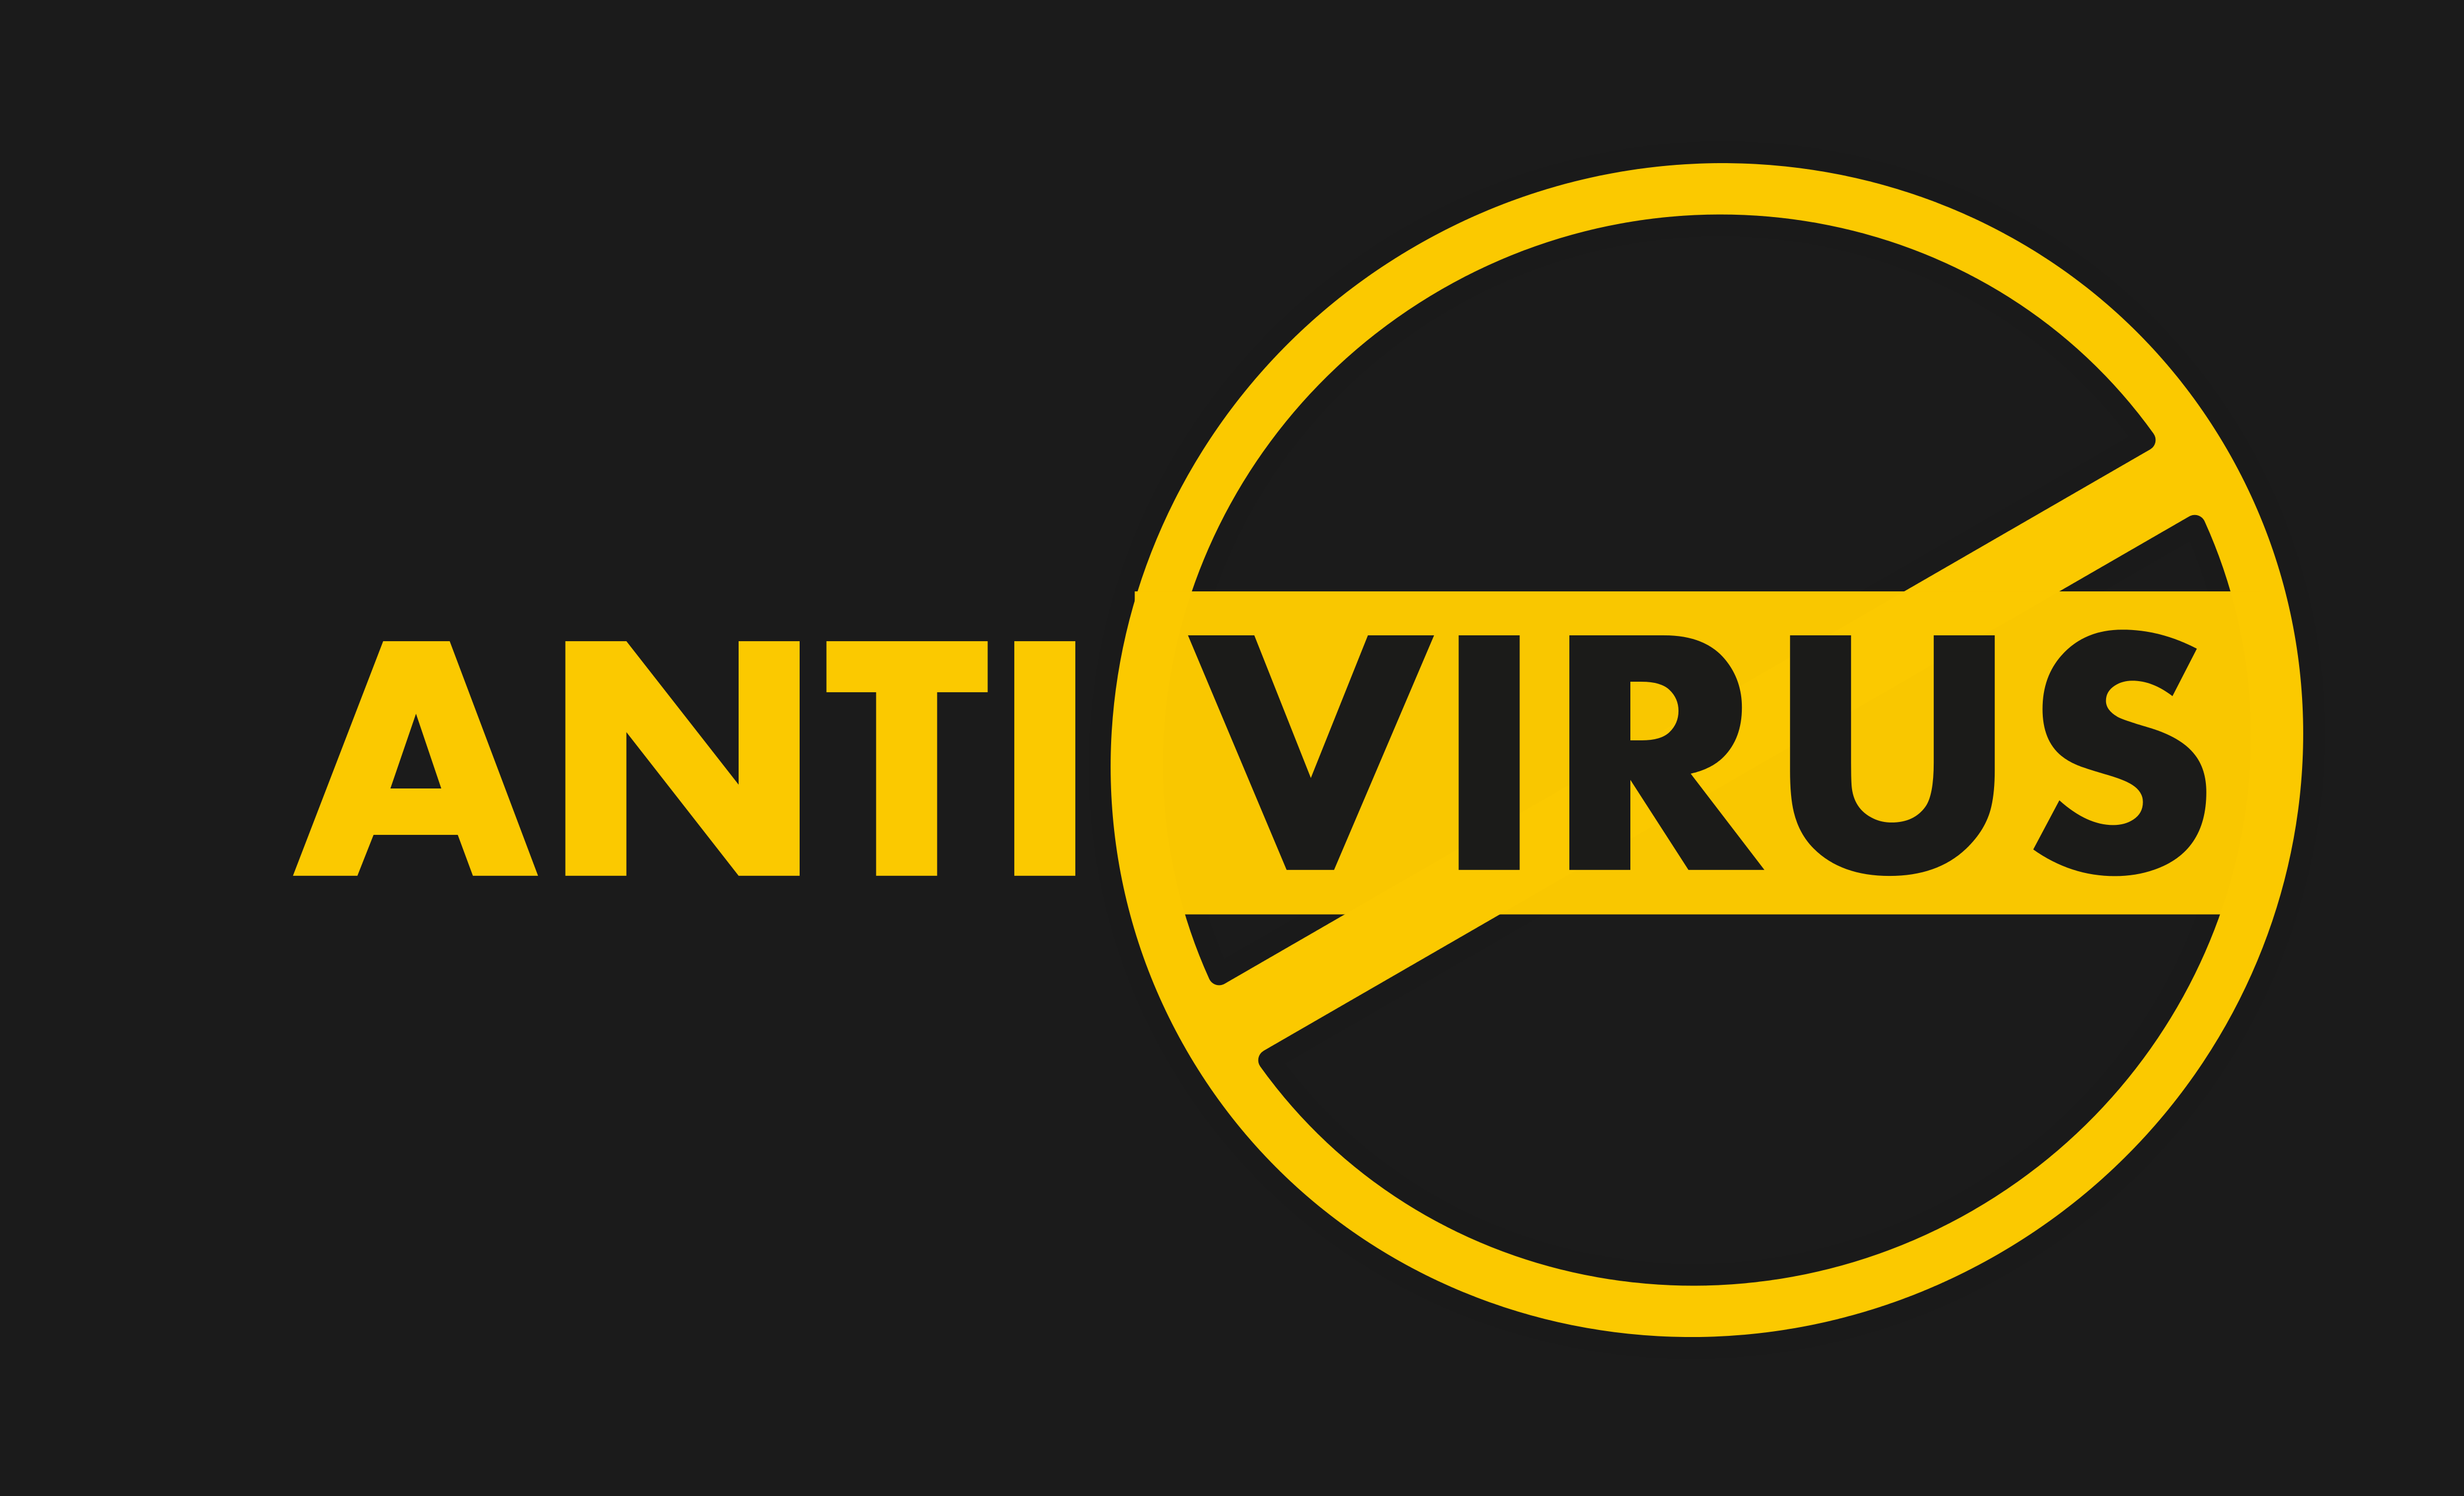 How Does Antivirus Software Work?